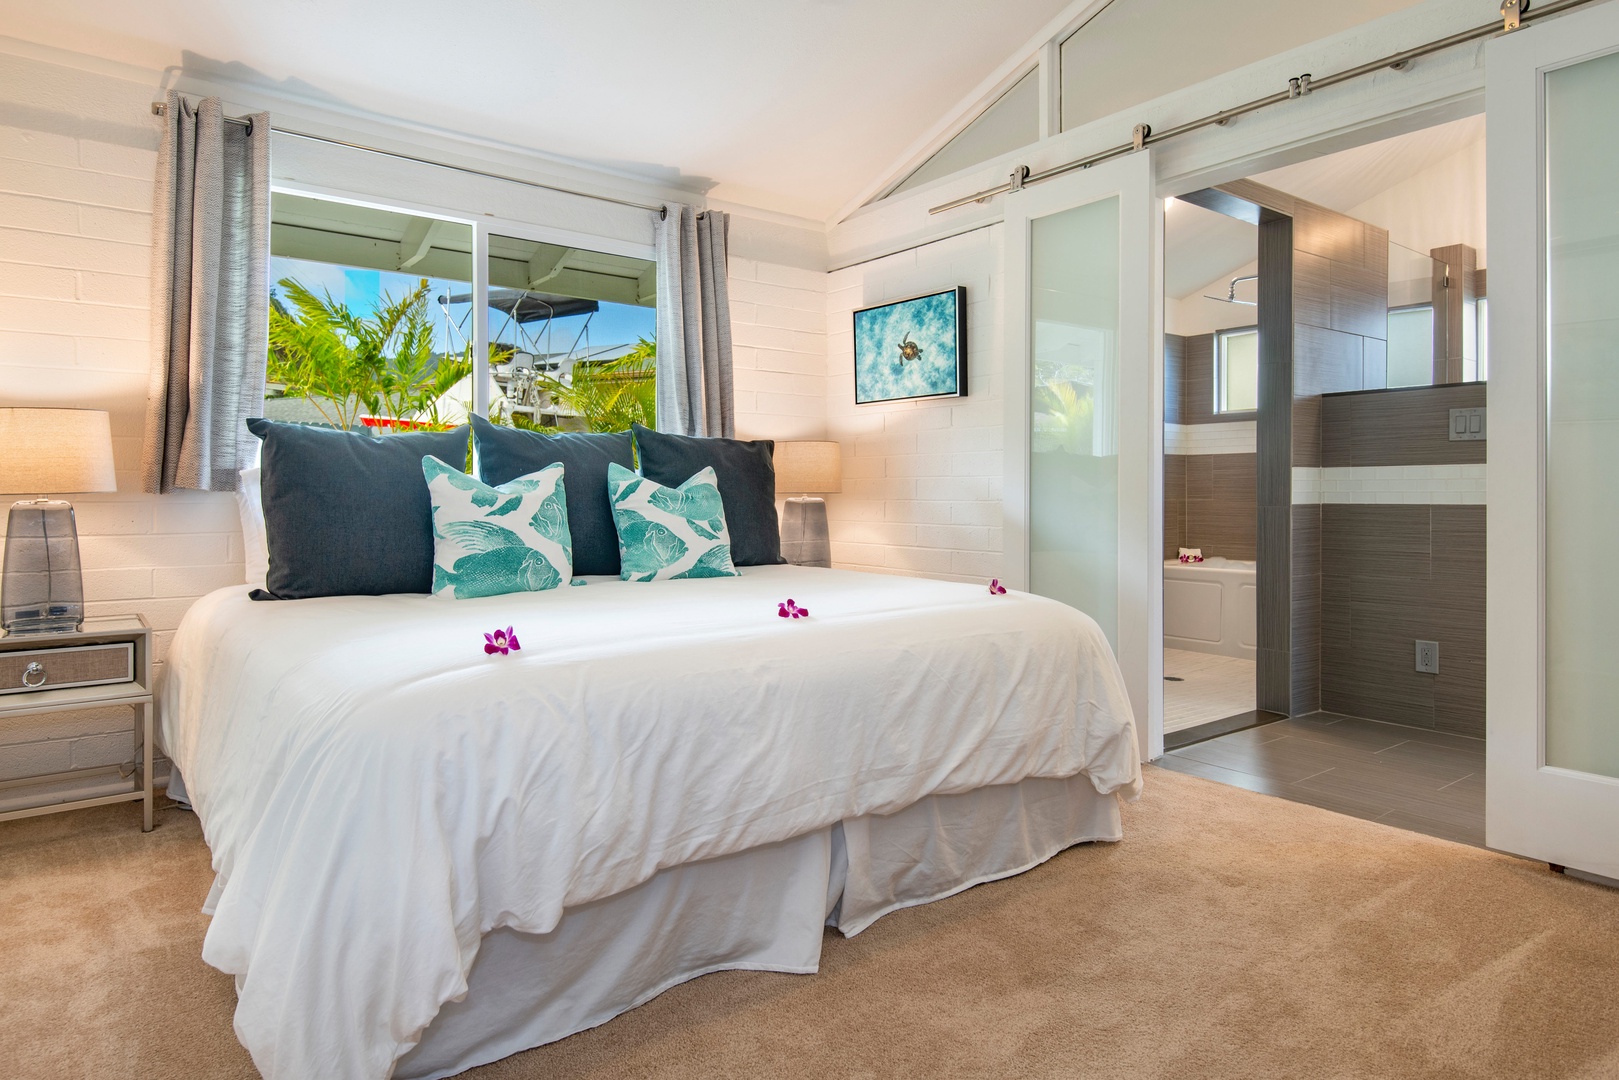 Honolulu Vacation Rentals, Holoholo Hale - Primary bedroom, king bed, split ac, and en-suite bathroom that leads out to the lanai and marina.